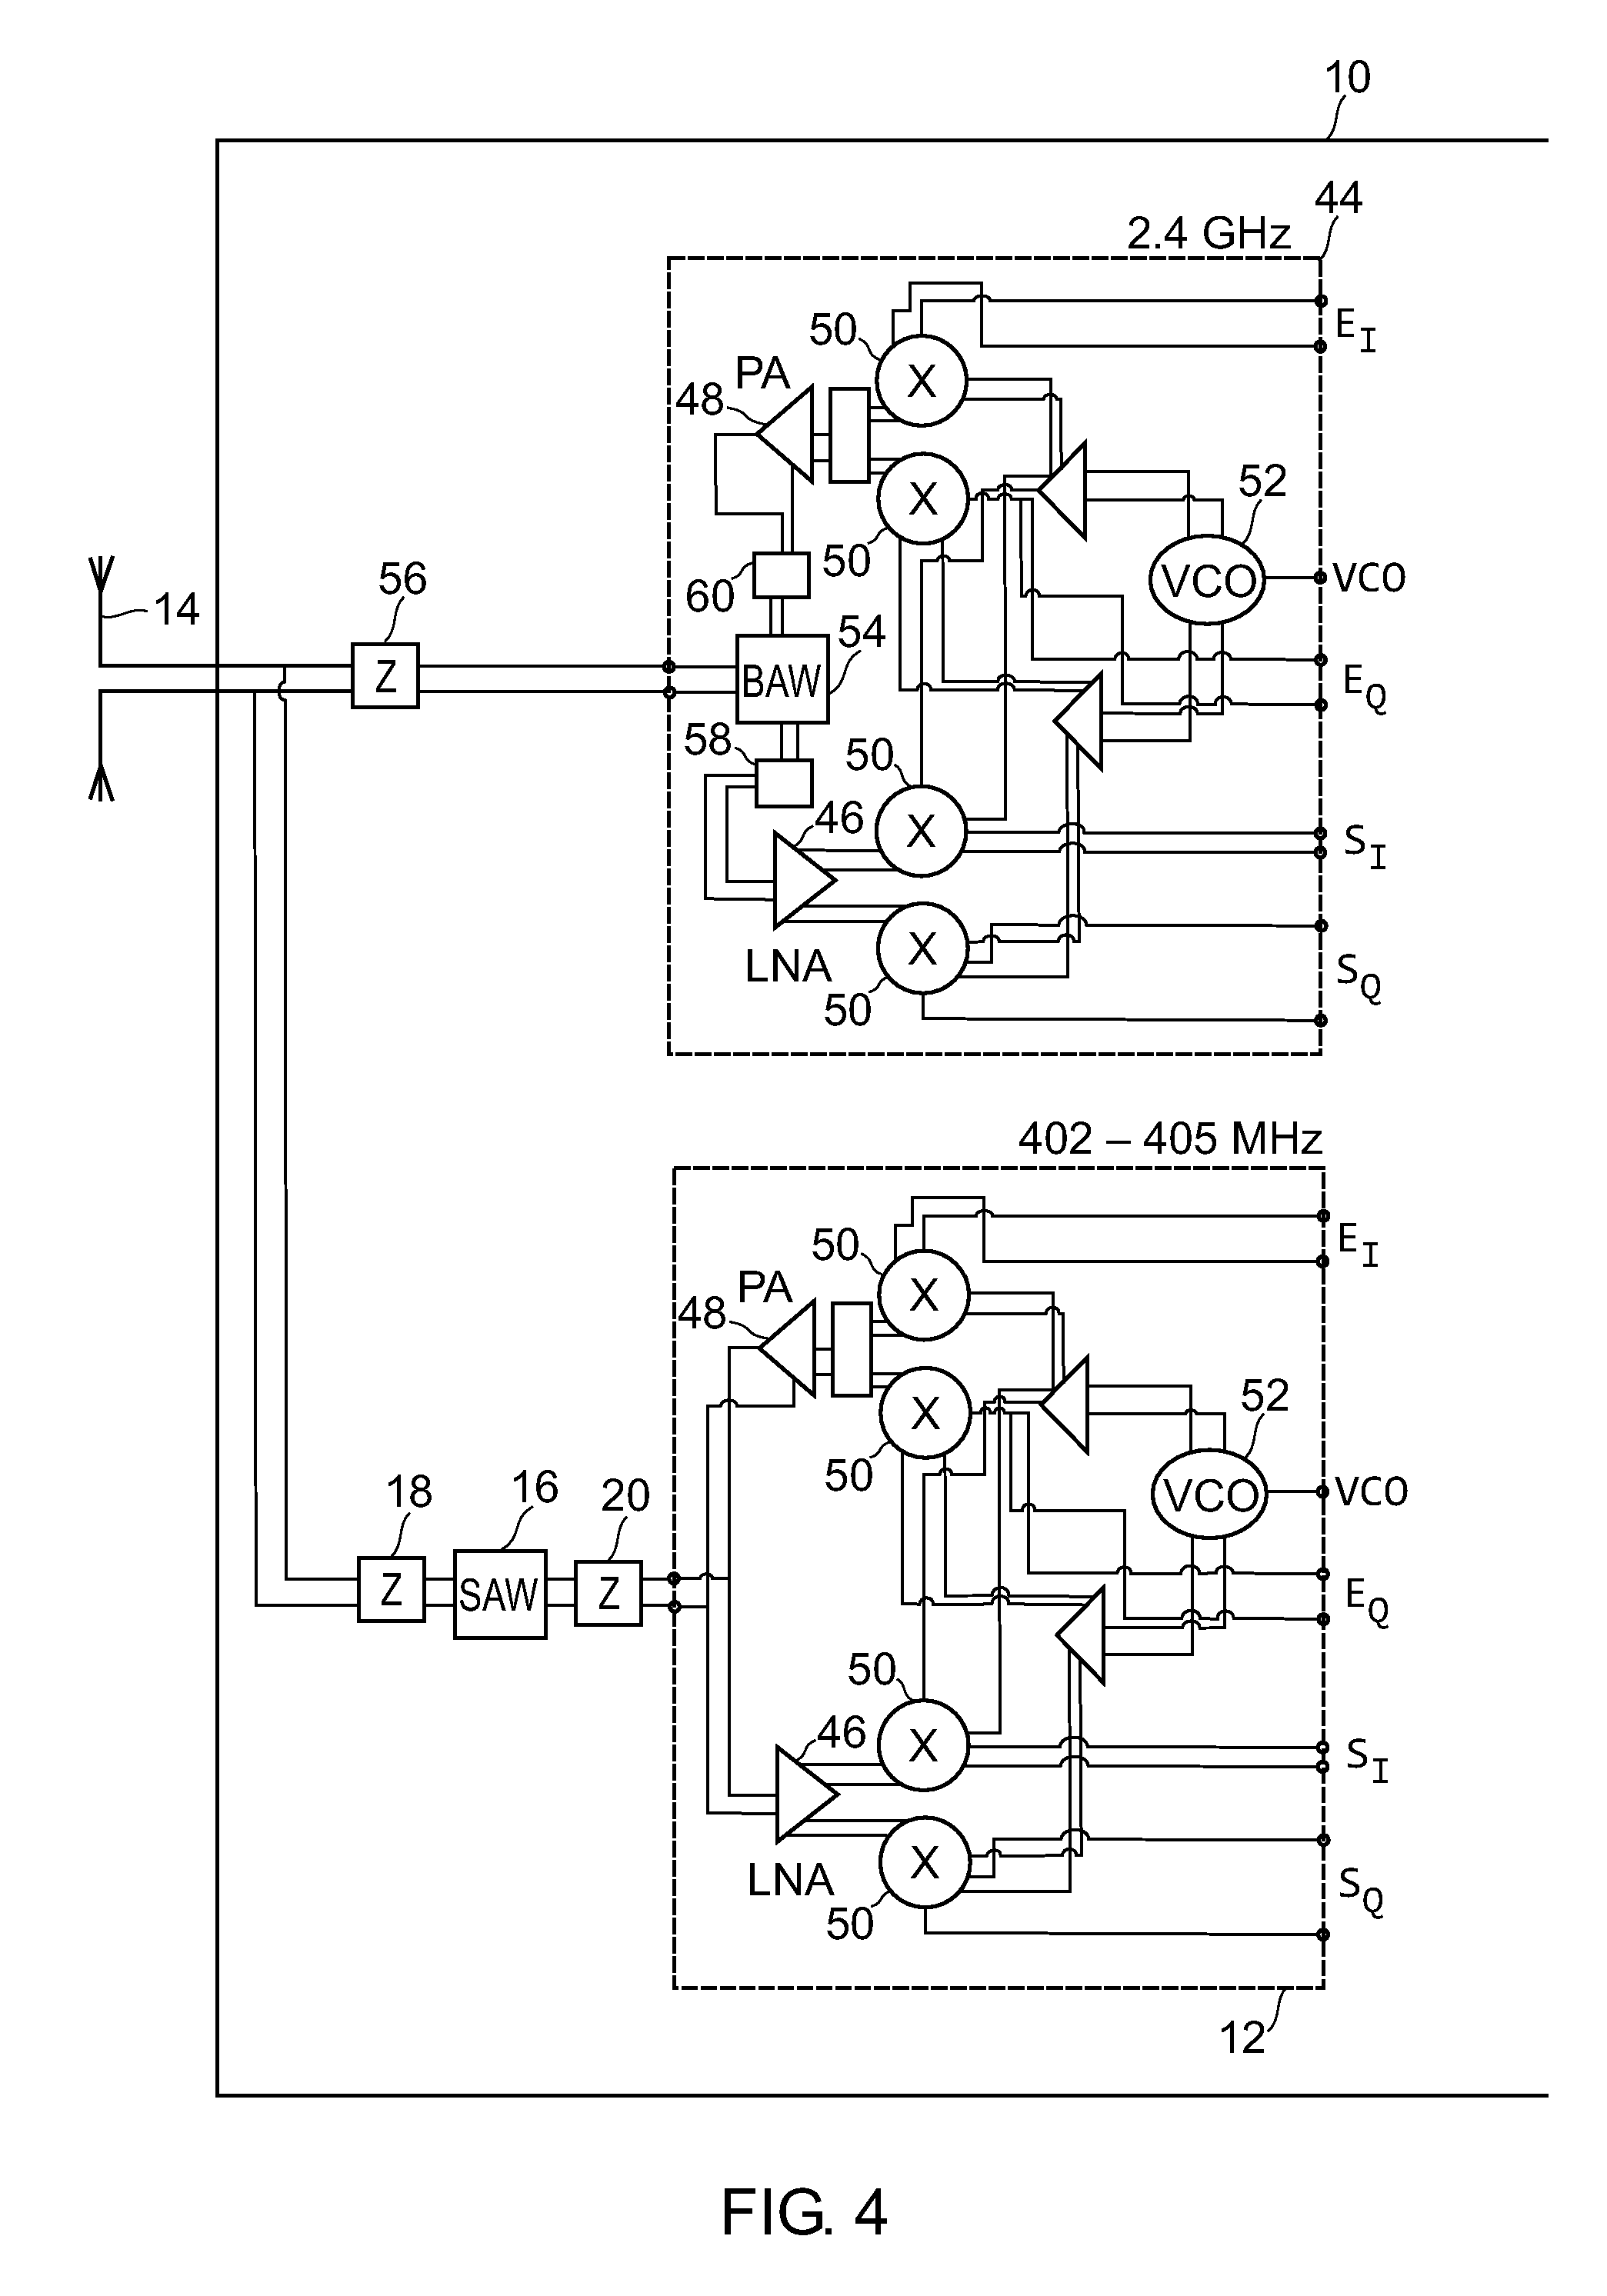 RF telemetry for an active medical device such as an implant or programmer for an implant